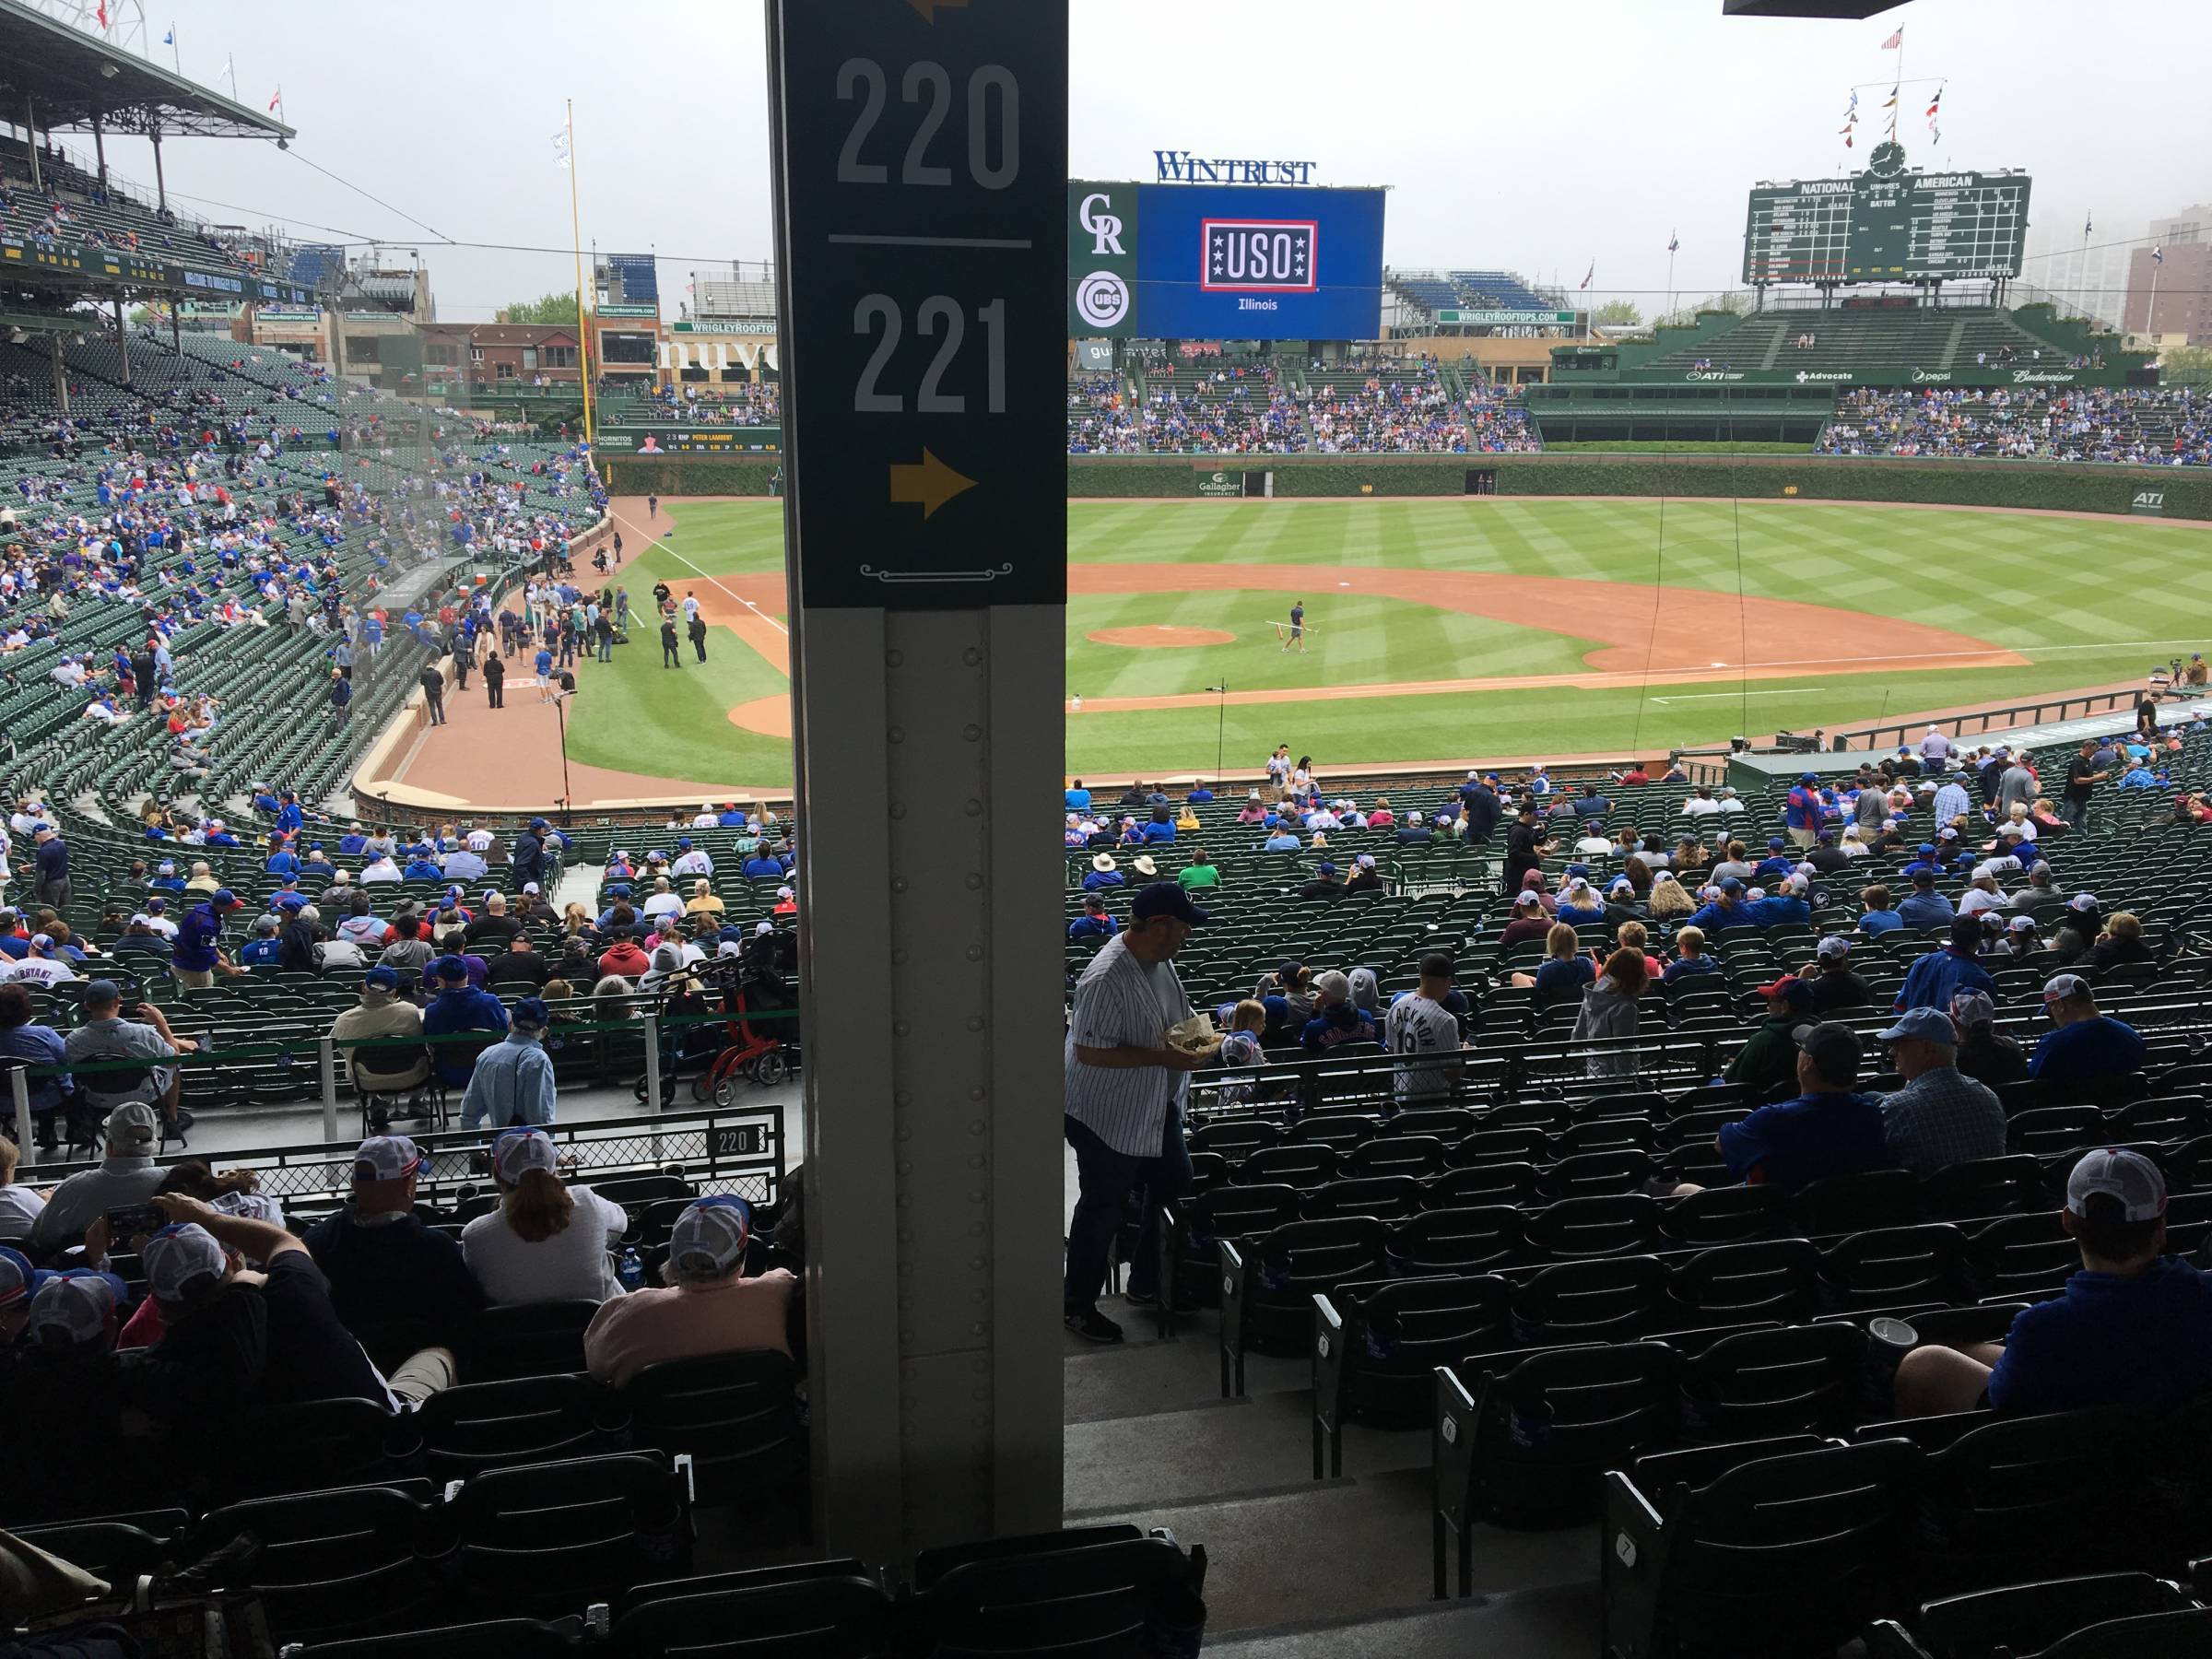 Pole in Section 220 at Wrigley Field